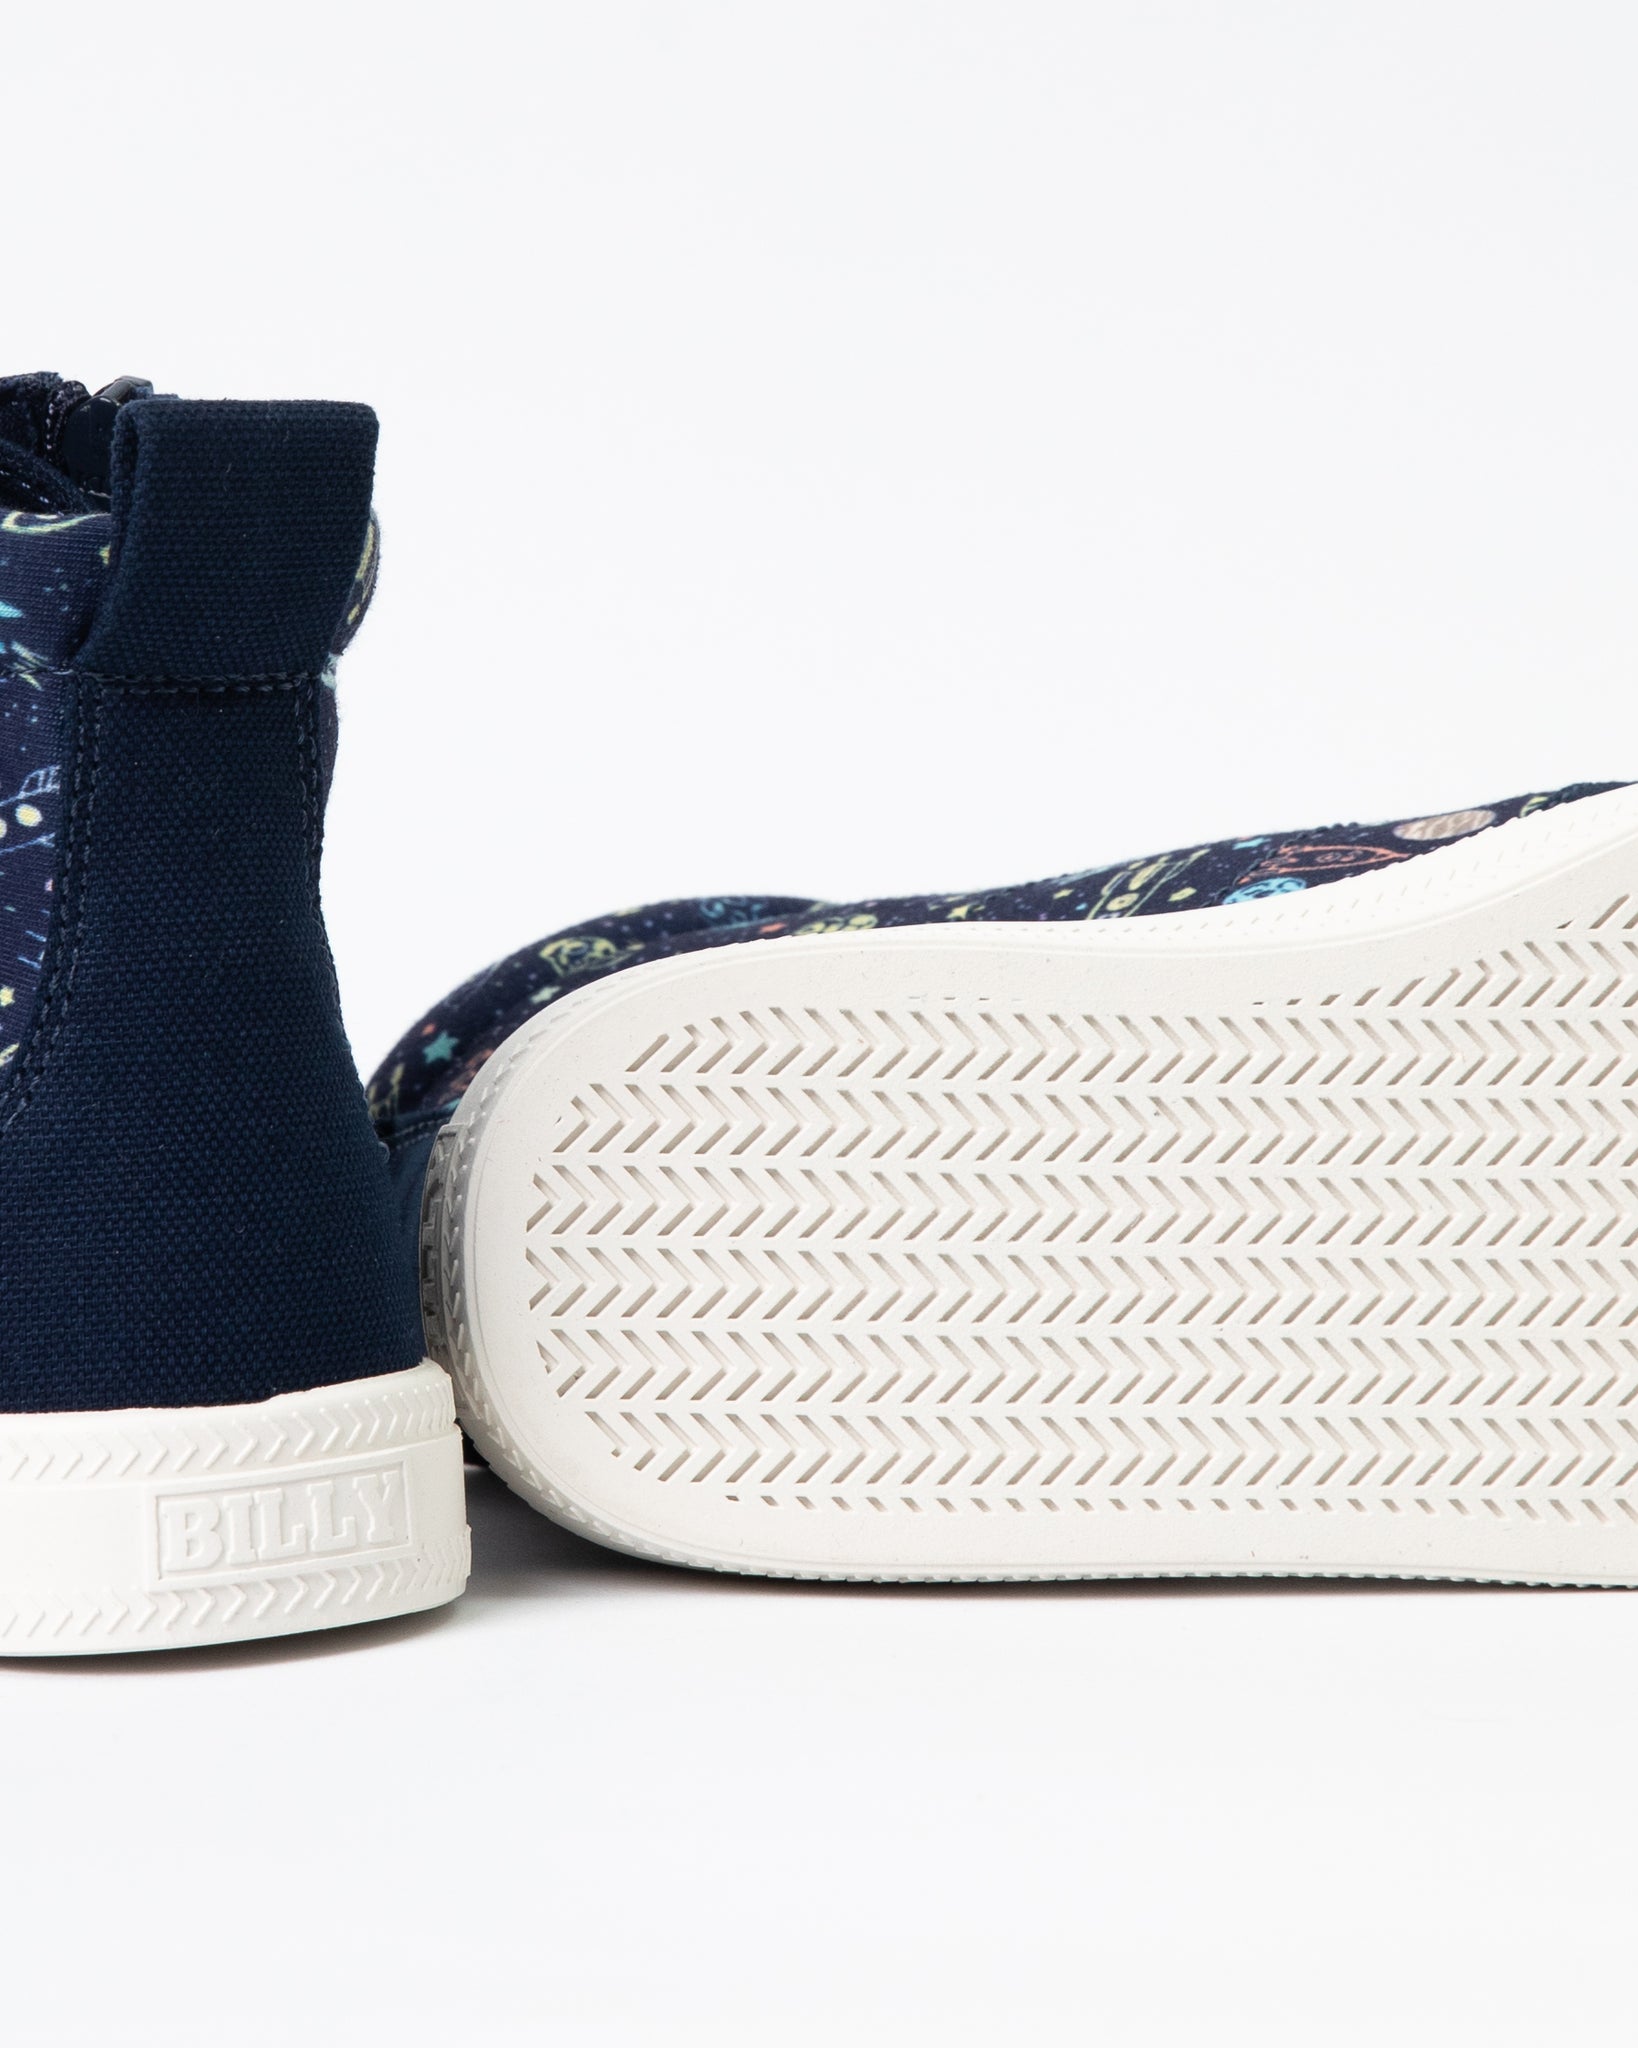 Classic High Top (Kids) - Navy Space